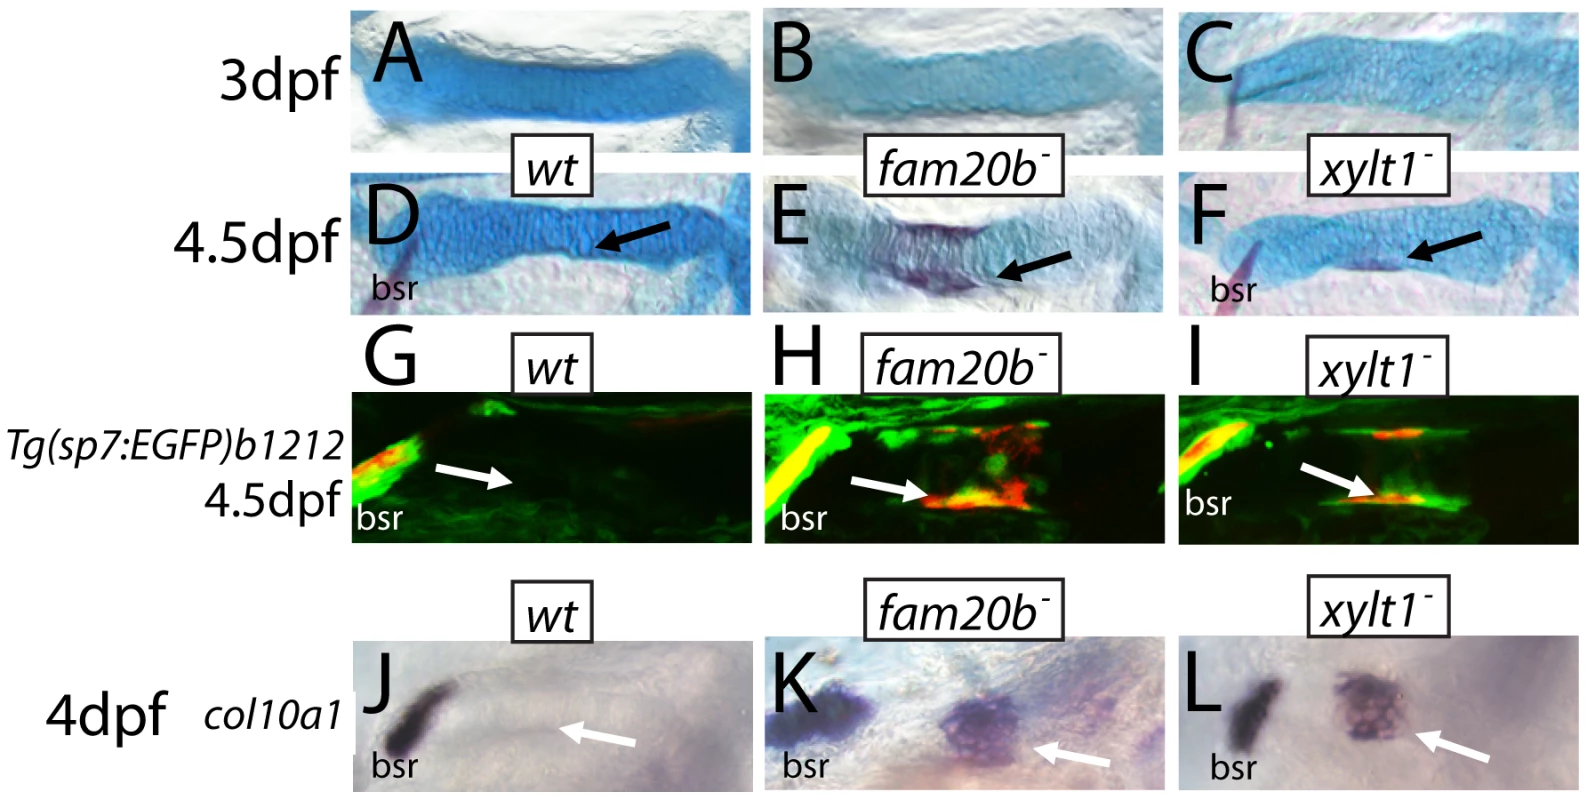 Precocious bone formation and osteoblast differentiation in perichondria of <i>fam20b</i> and <i>xylt1</i> mutants.